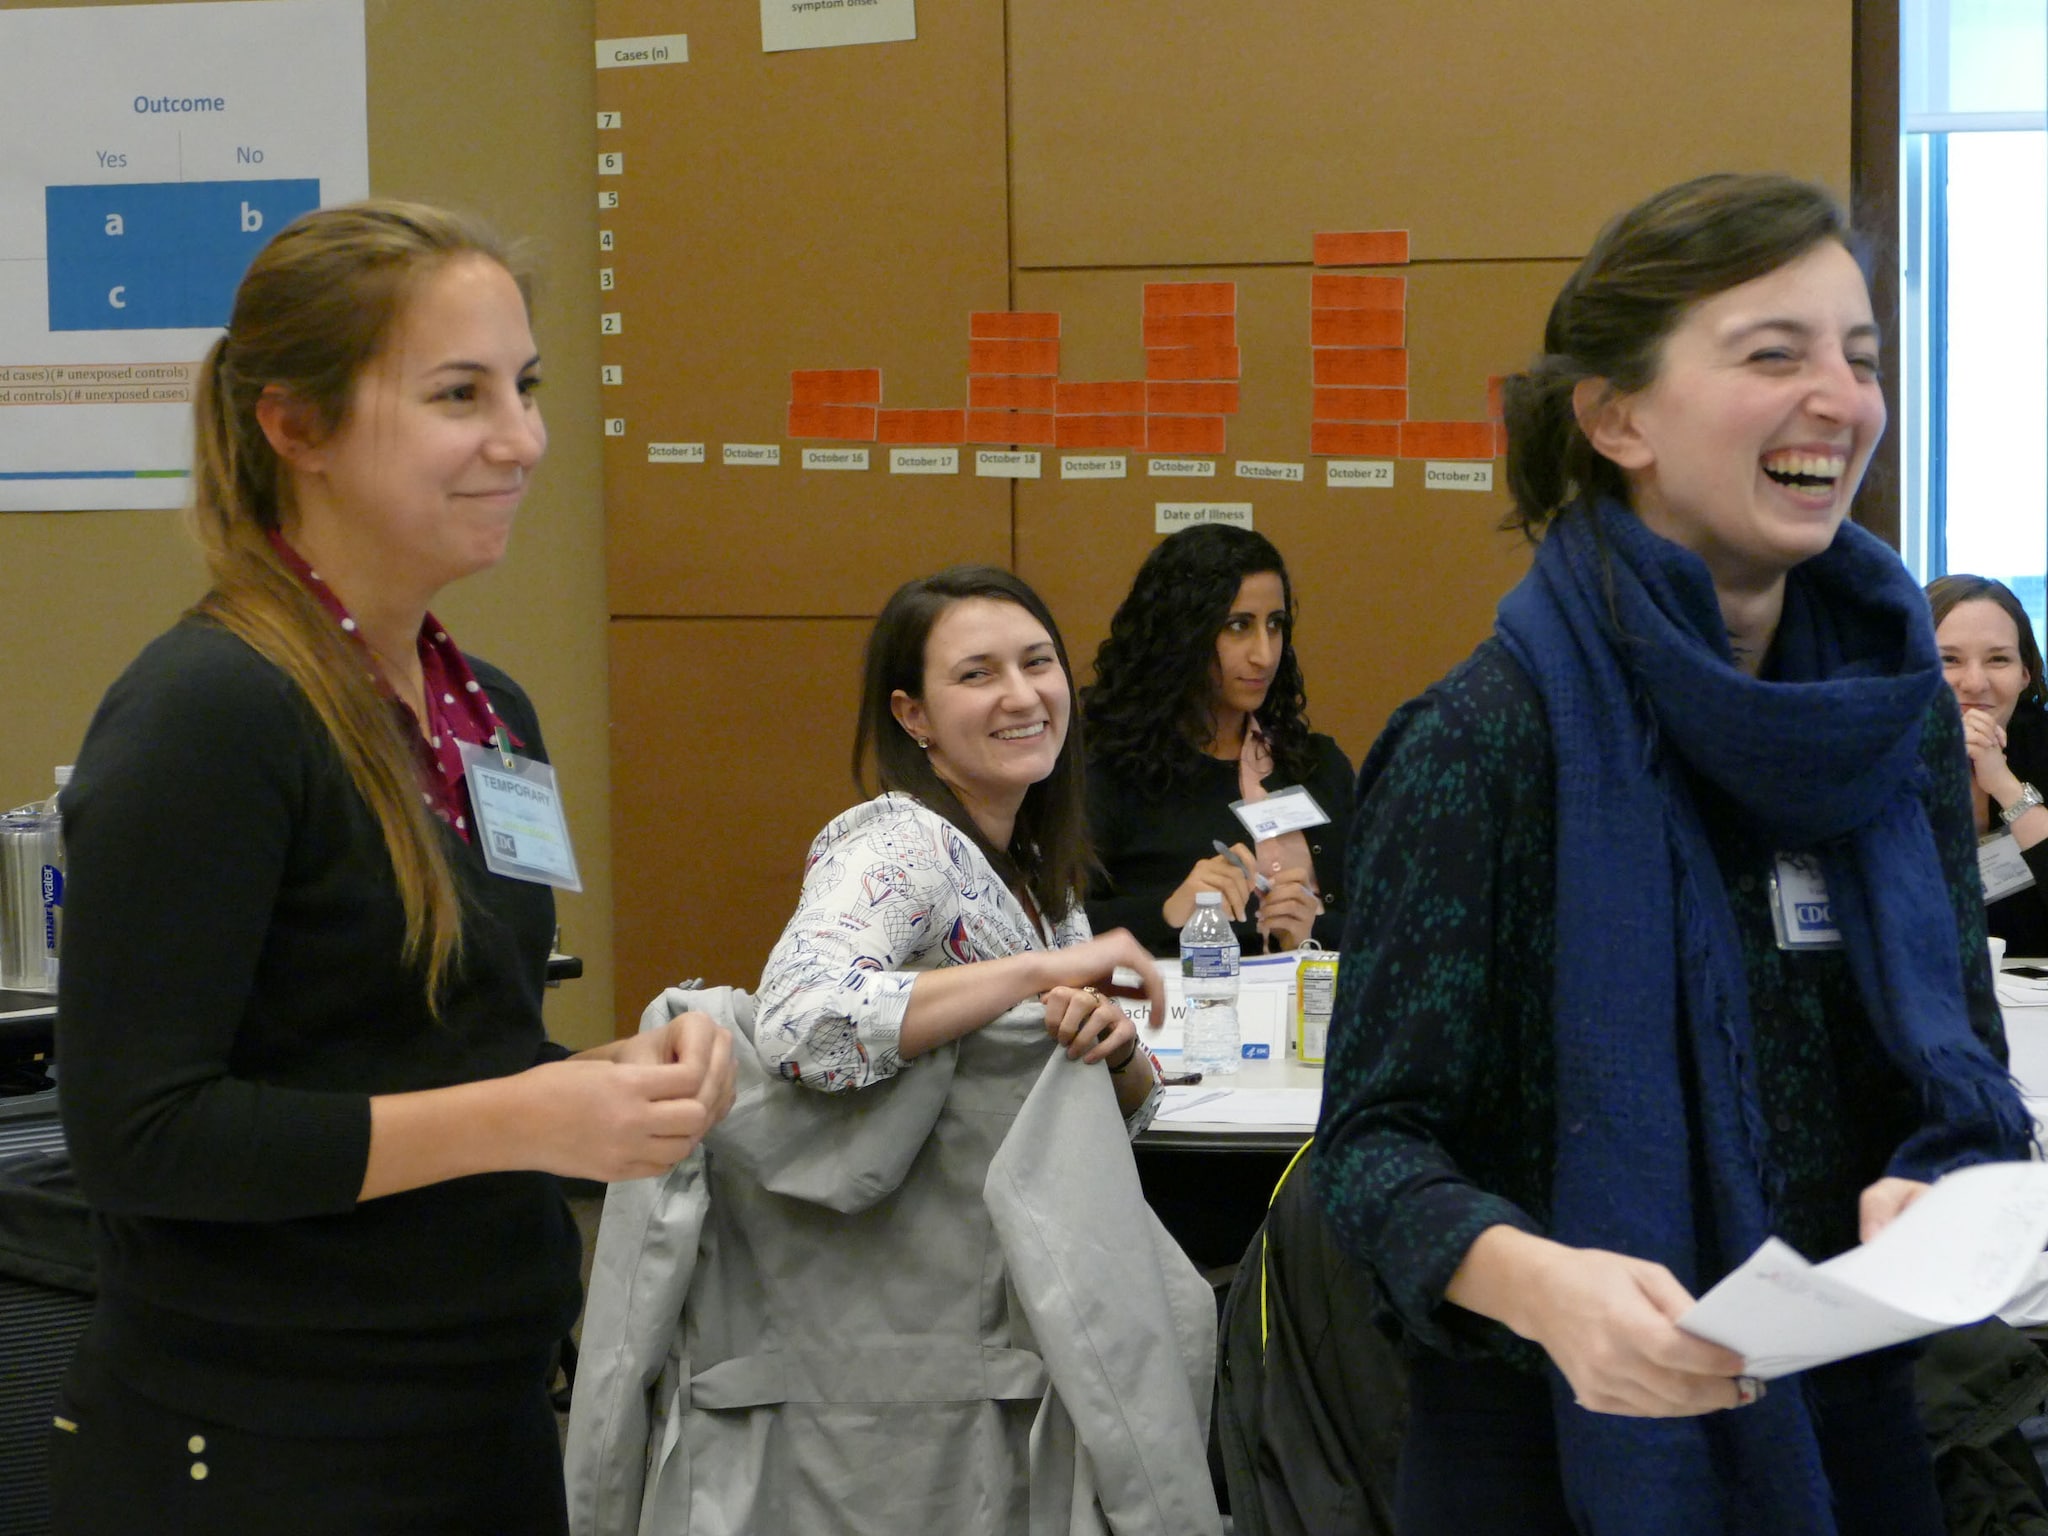 EEP students learn by hands-on experience and mentorship by CDC experts and engage in networking events.